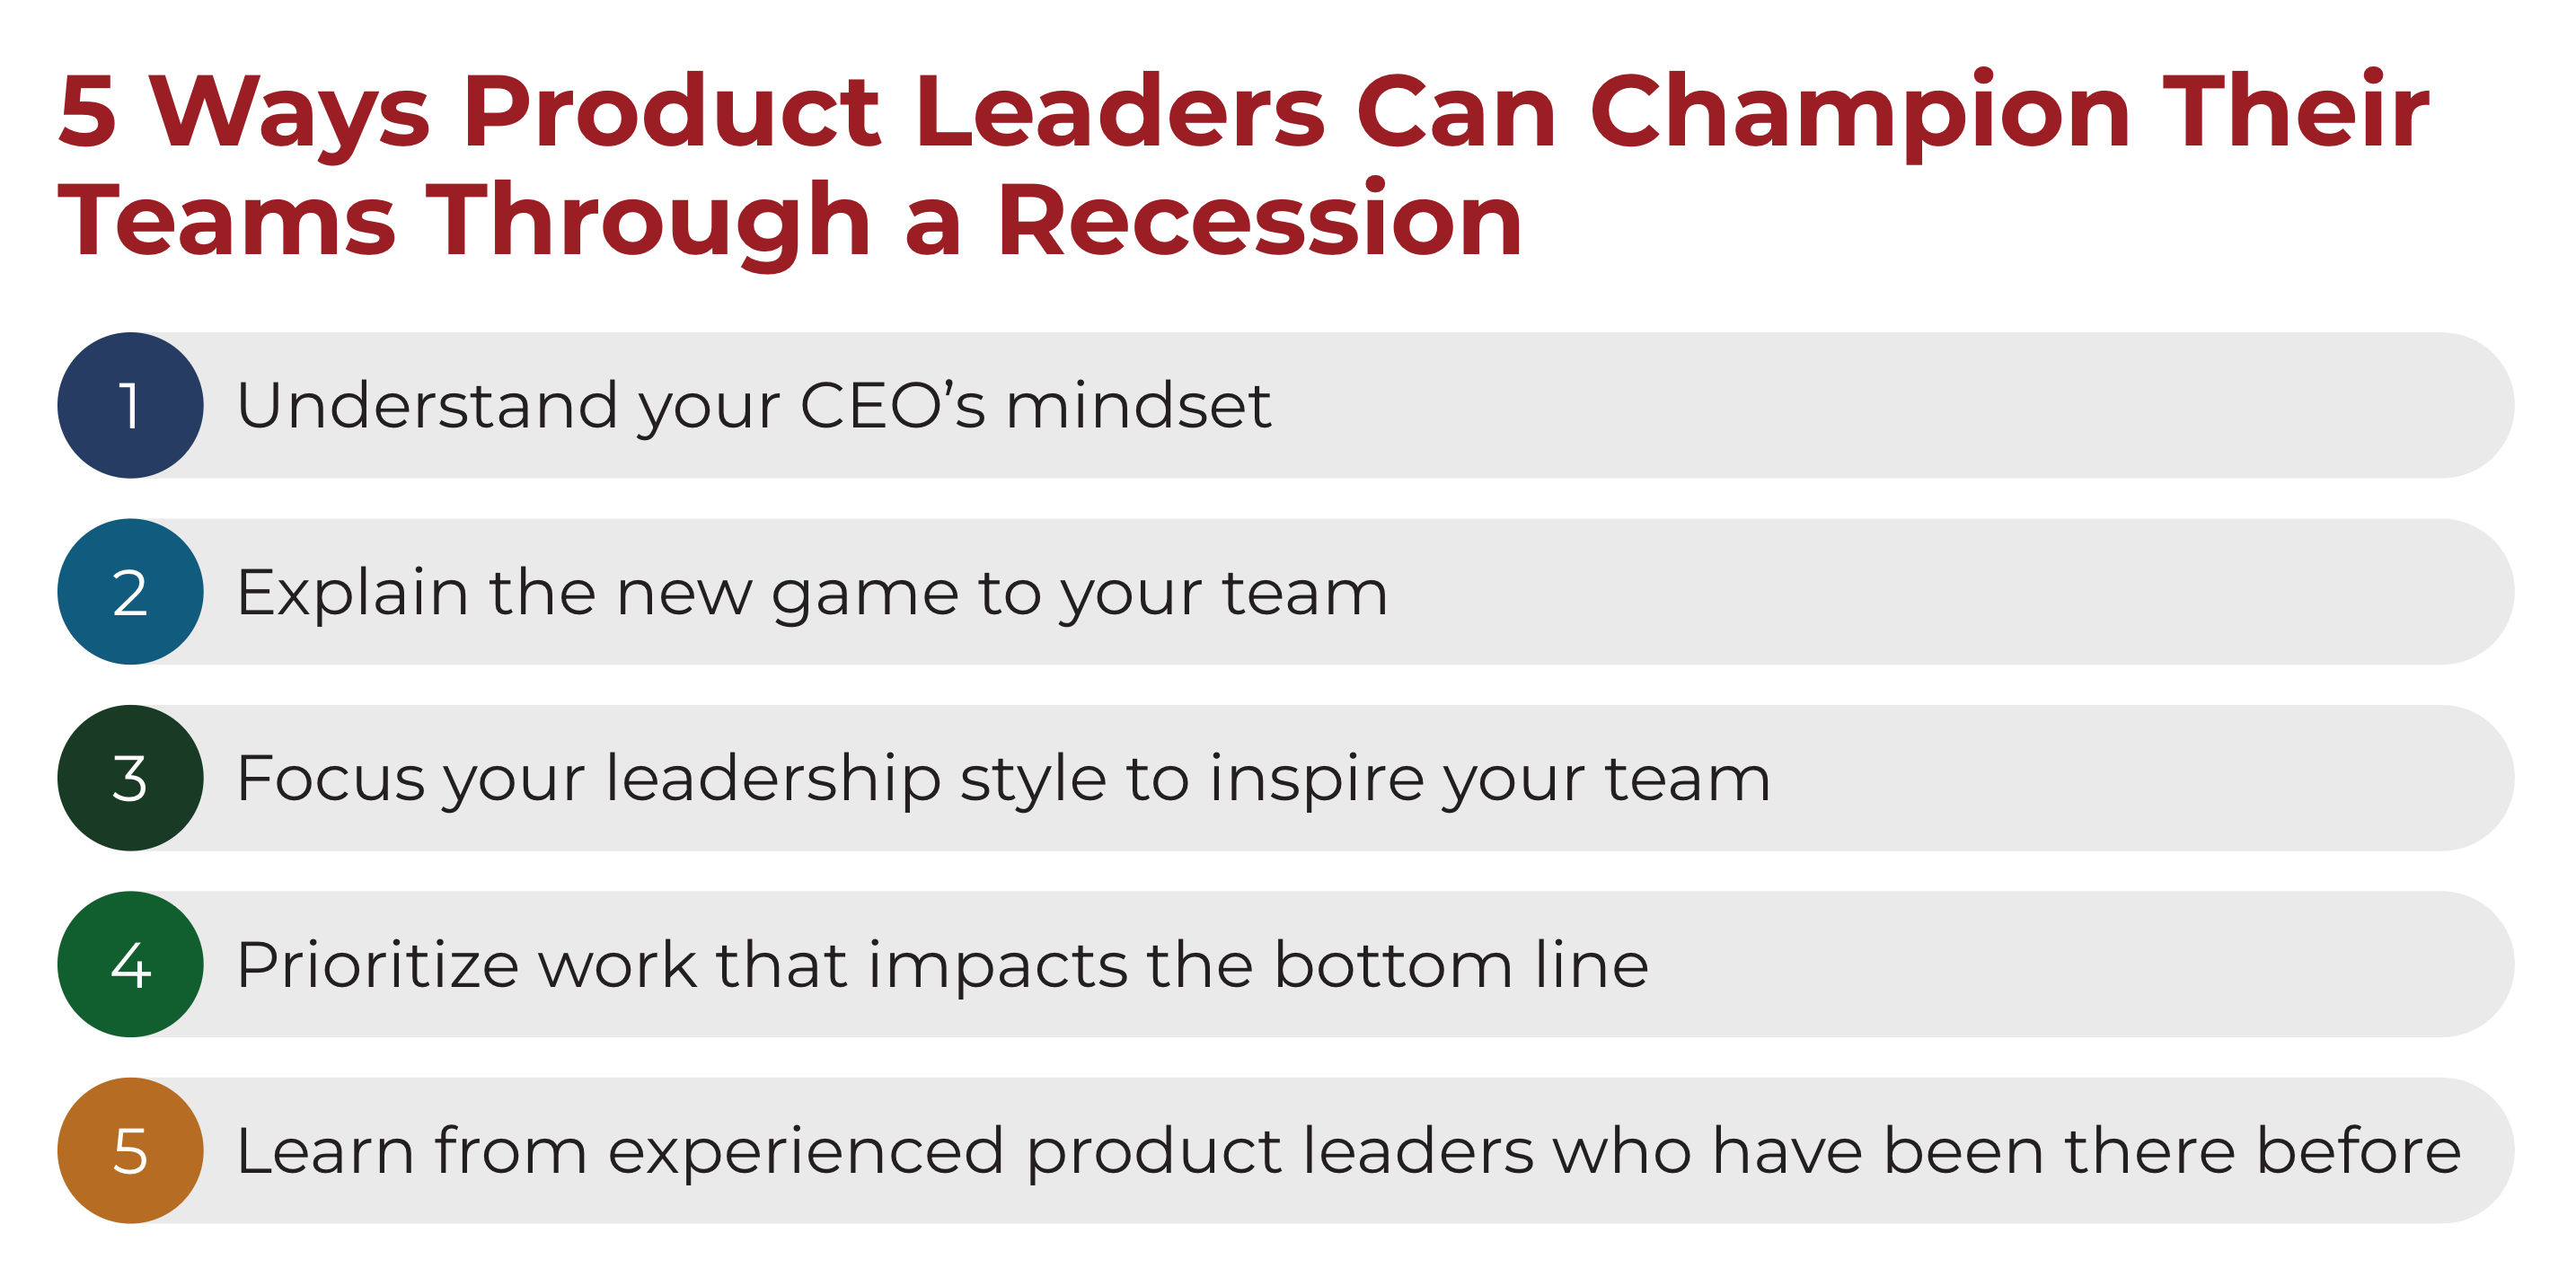 5 Ways Product Leaders Can Champion Their Teams Through a Recession